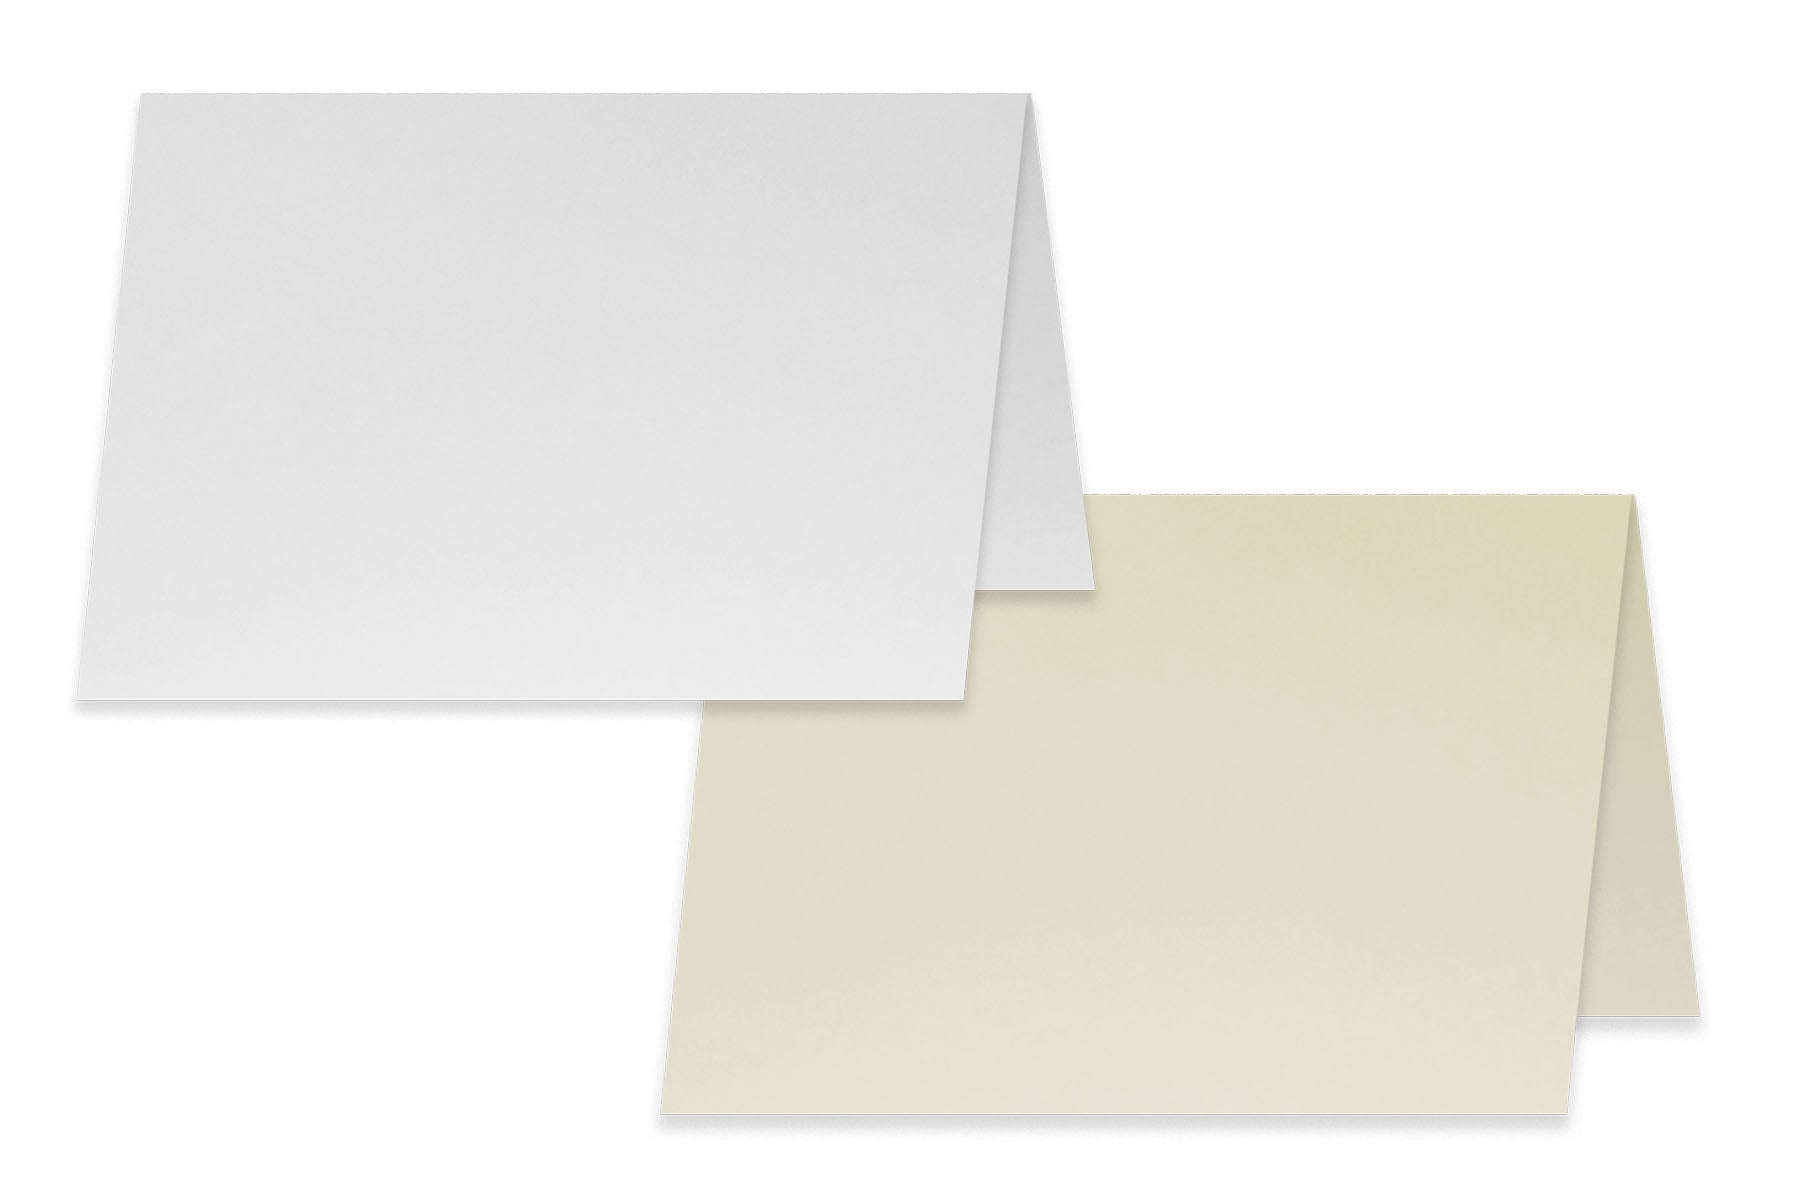 Classic Linen Natural or White Discount Card Stock for DIY invites -  CutCardStock